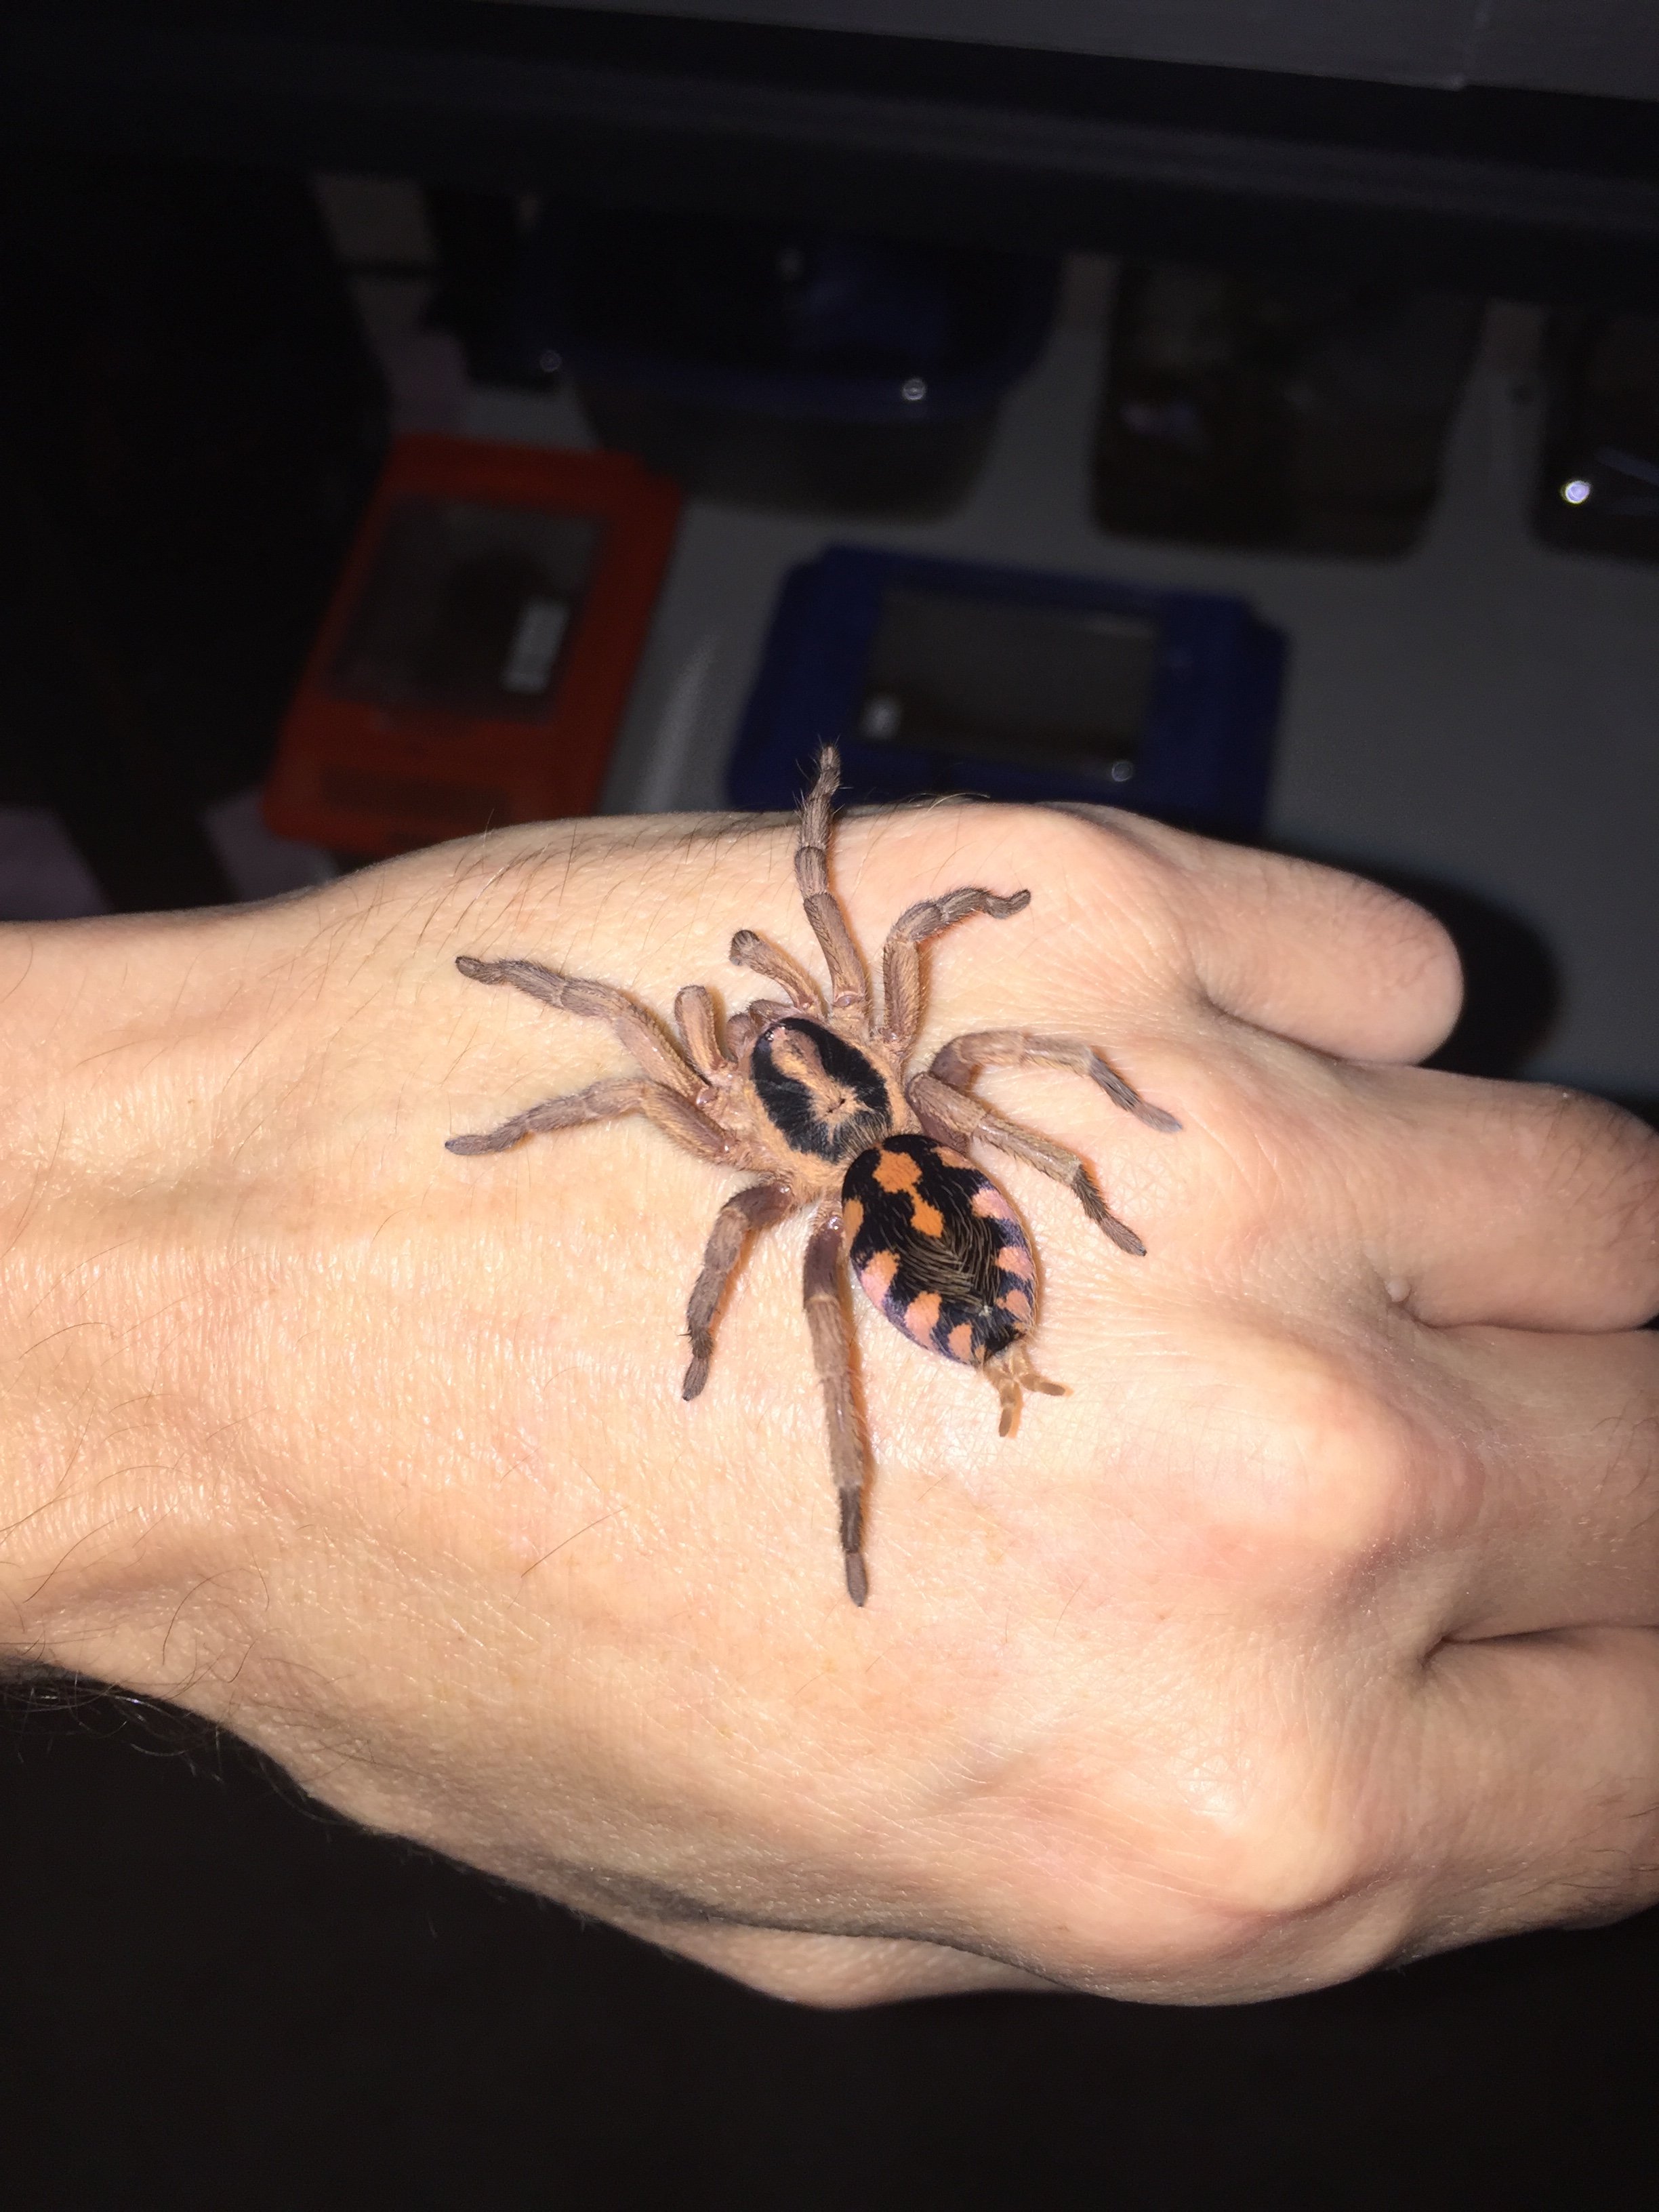 Pumpkin patch freshly molted